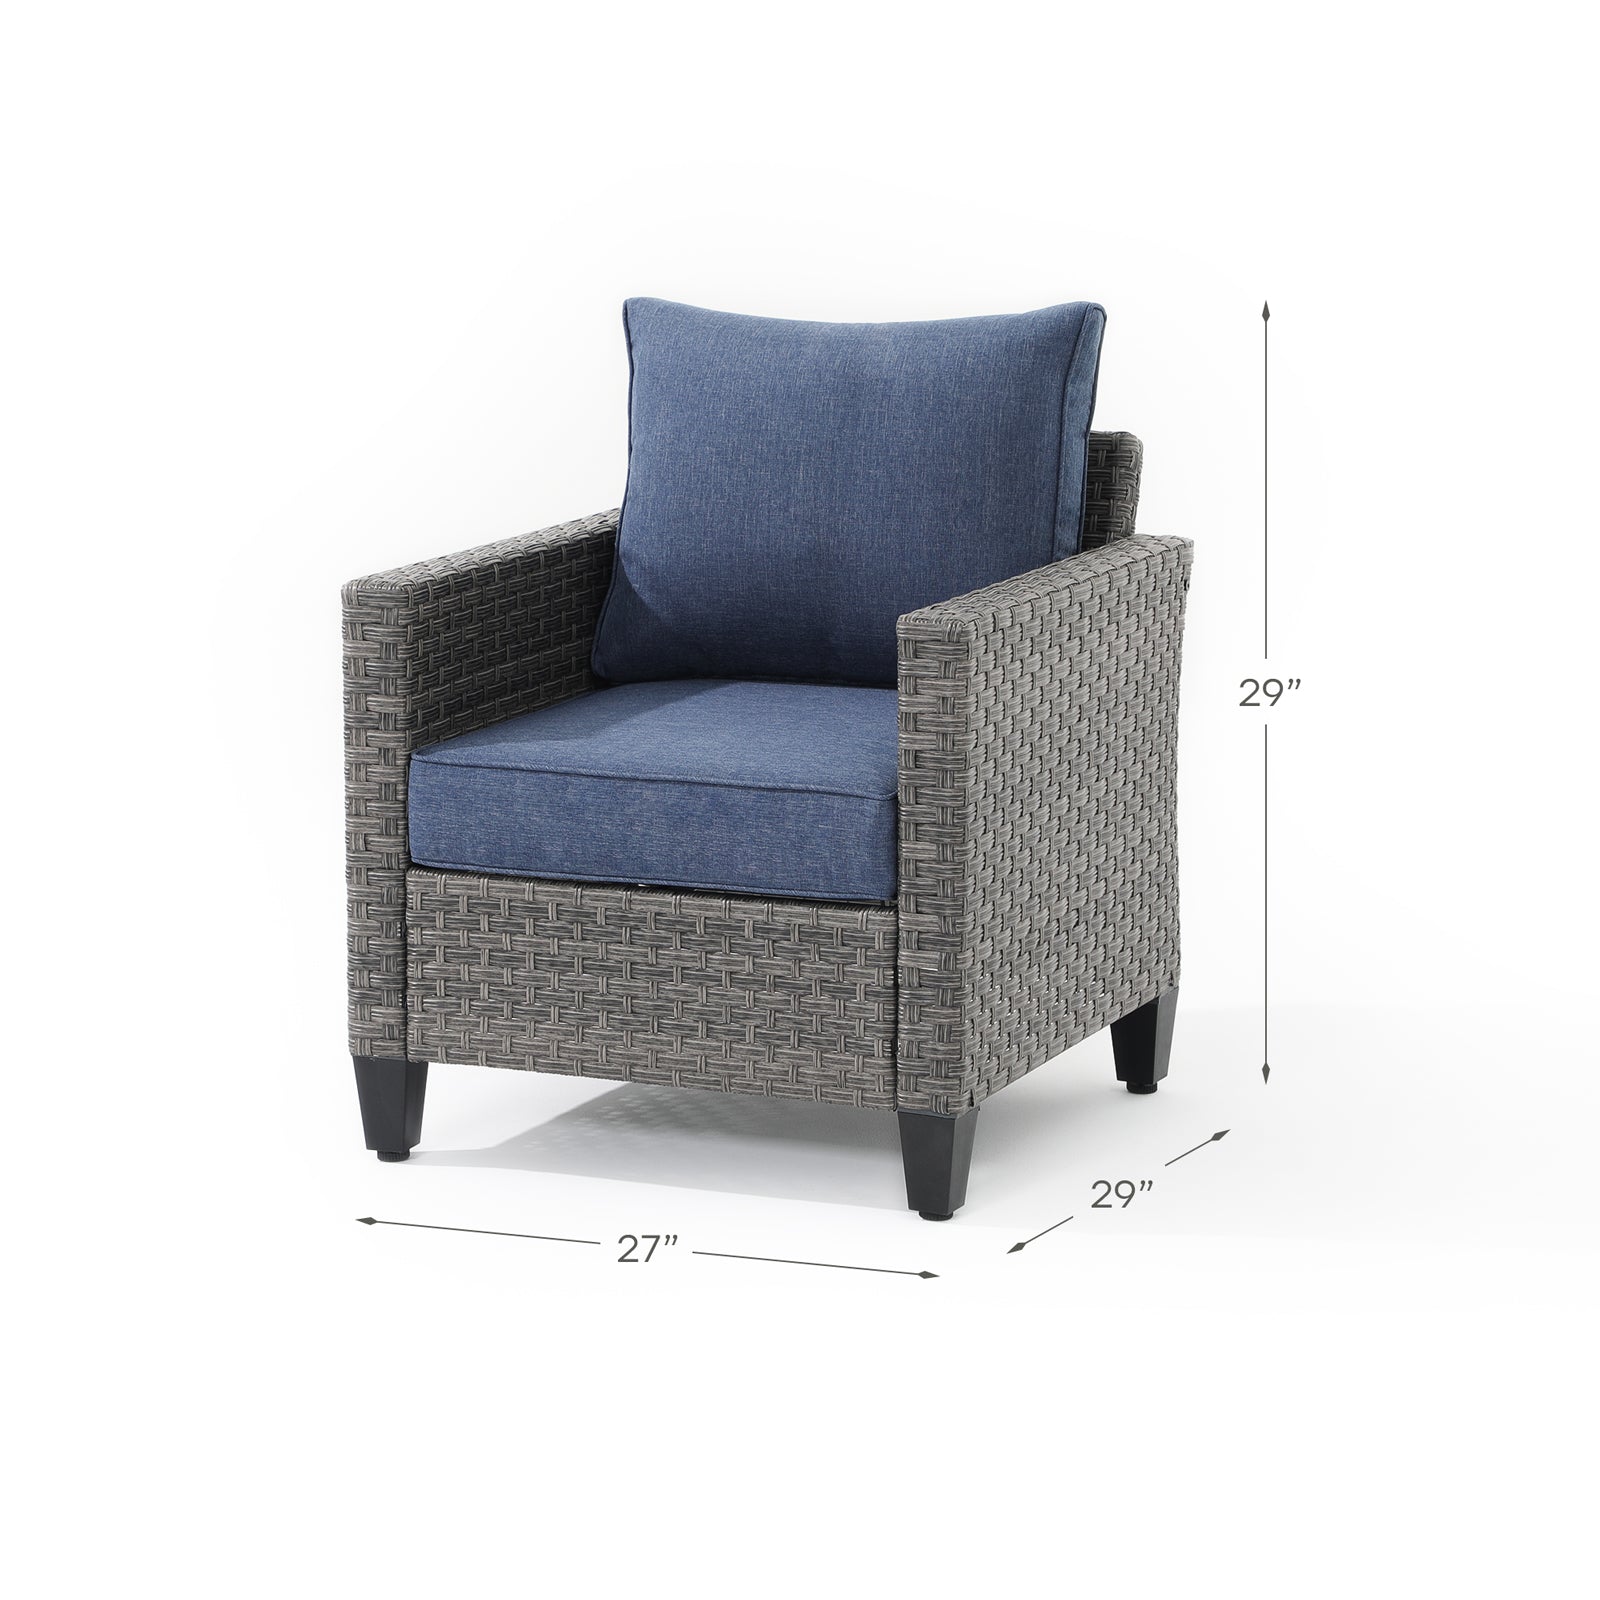 Ayia lounge chair with rattan design, blue cushions, dimension information - Jardina Furniture#color_Navy Blue